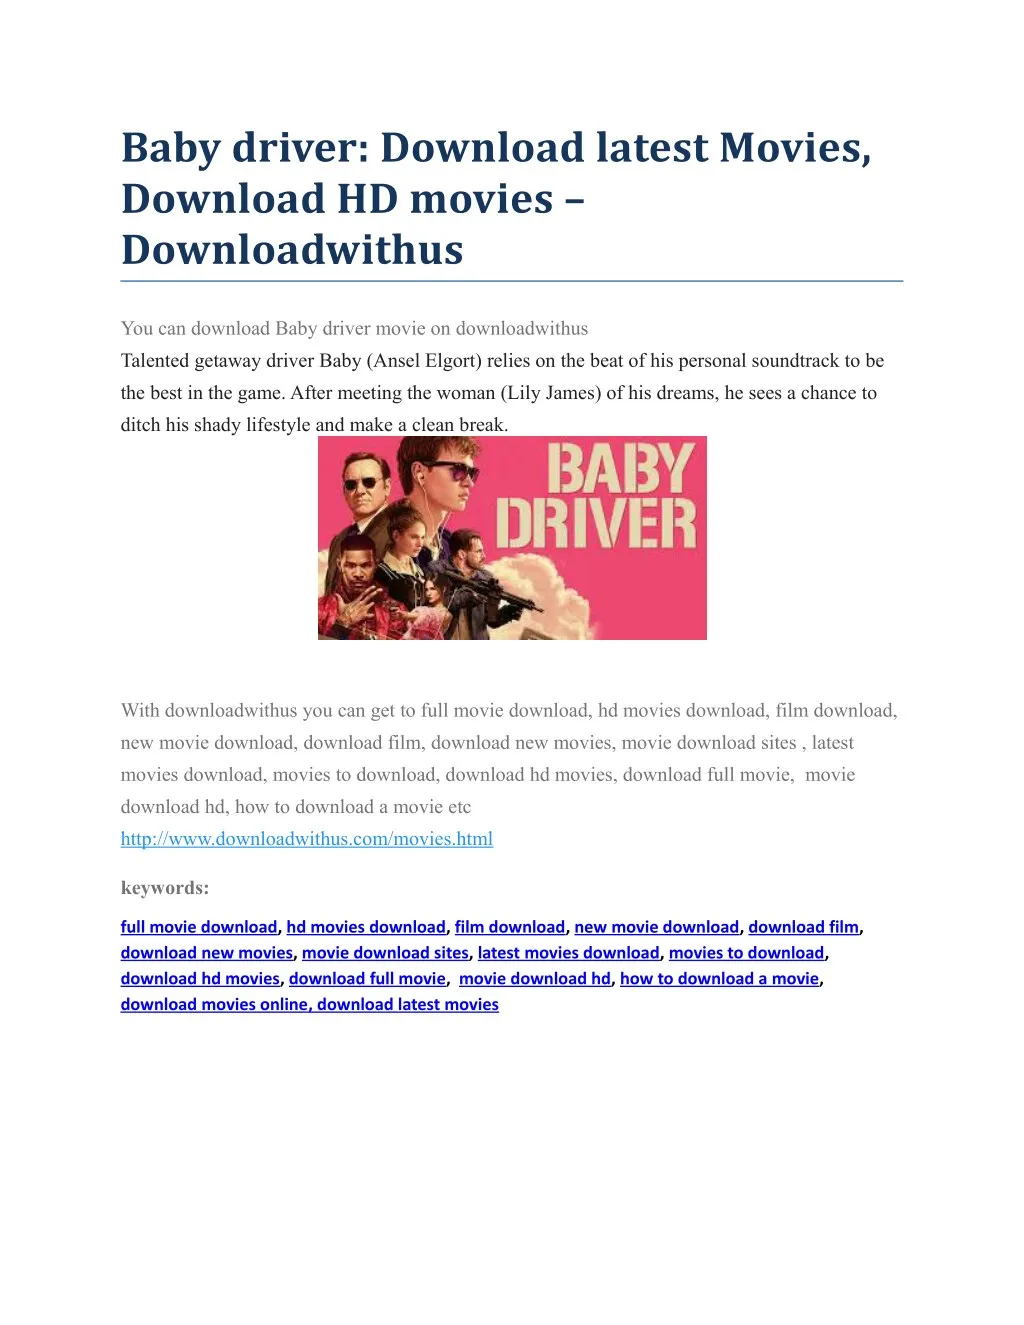 baby driver download latest movies download